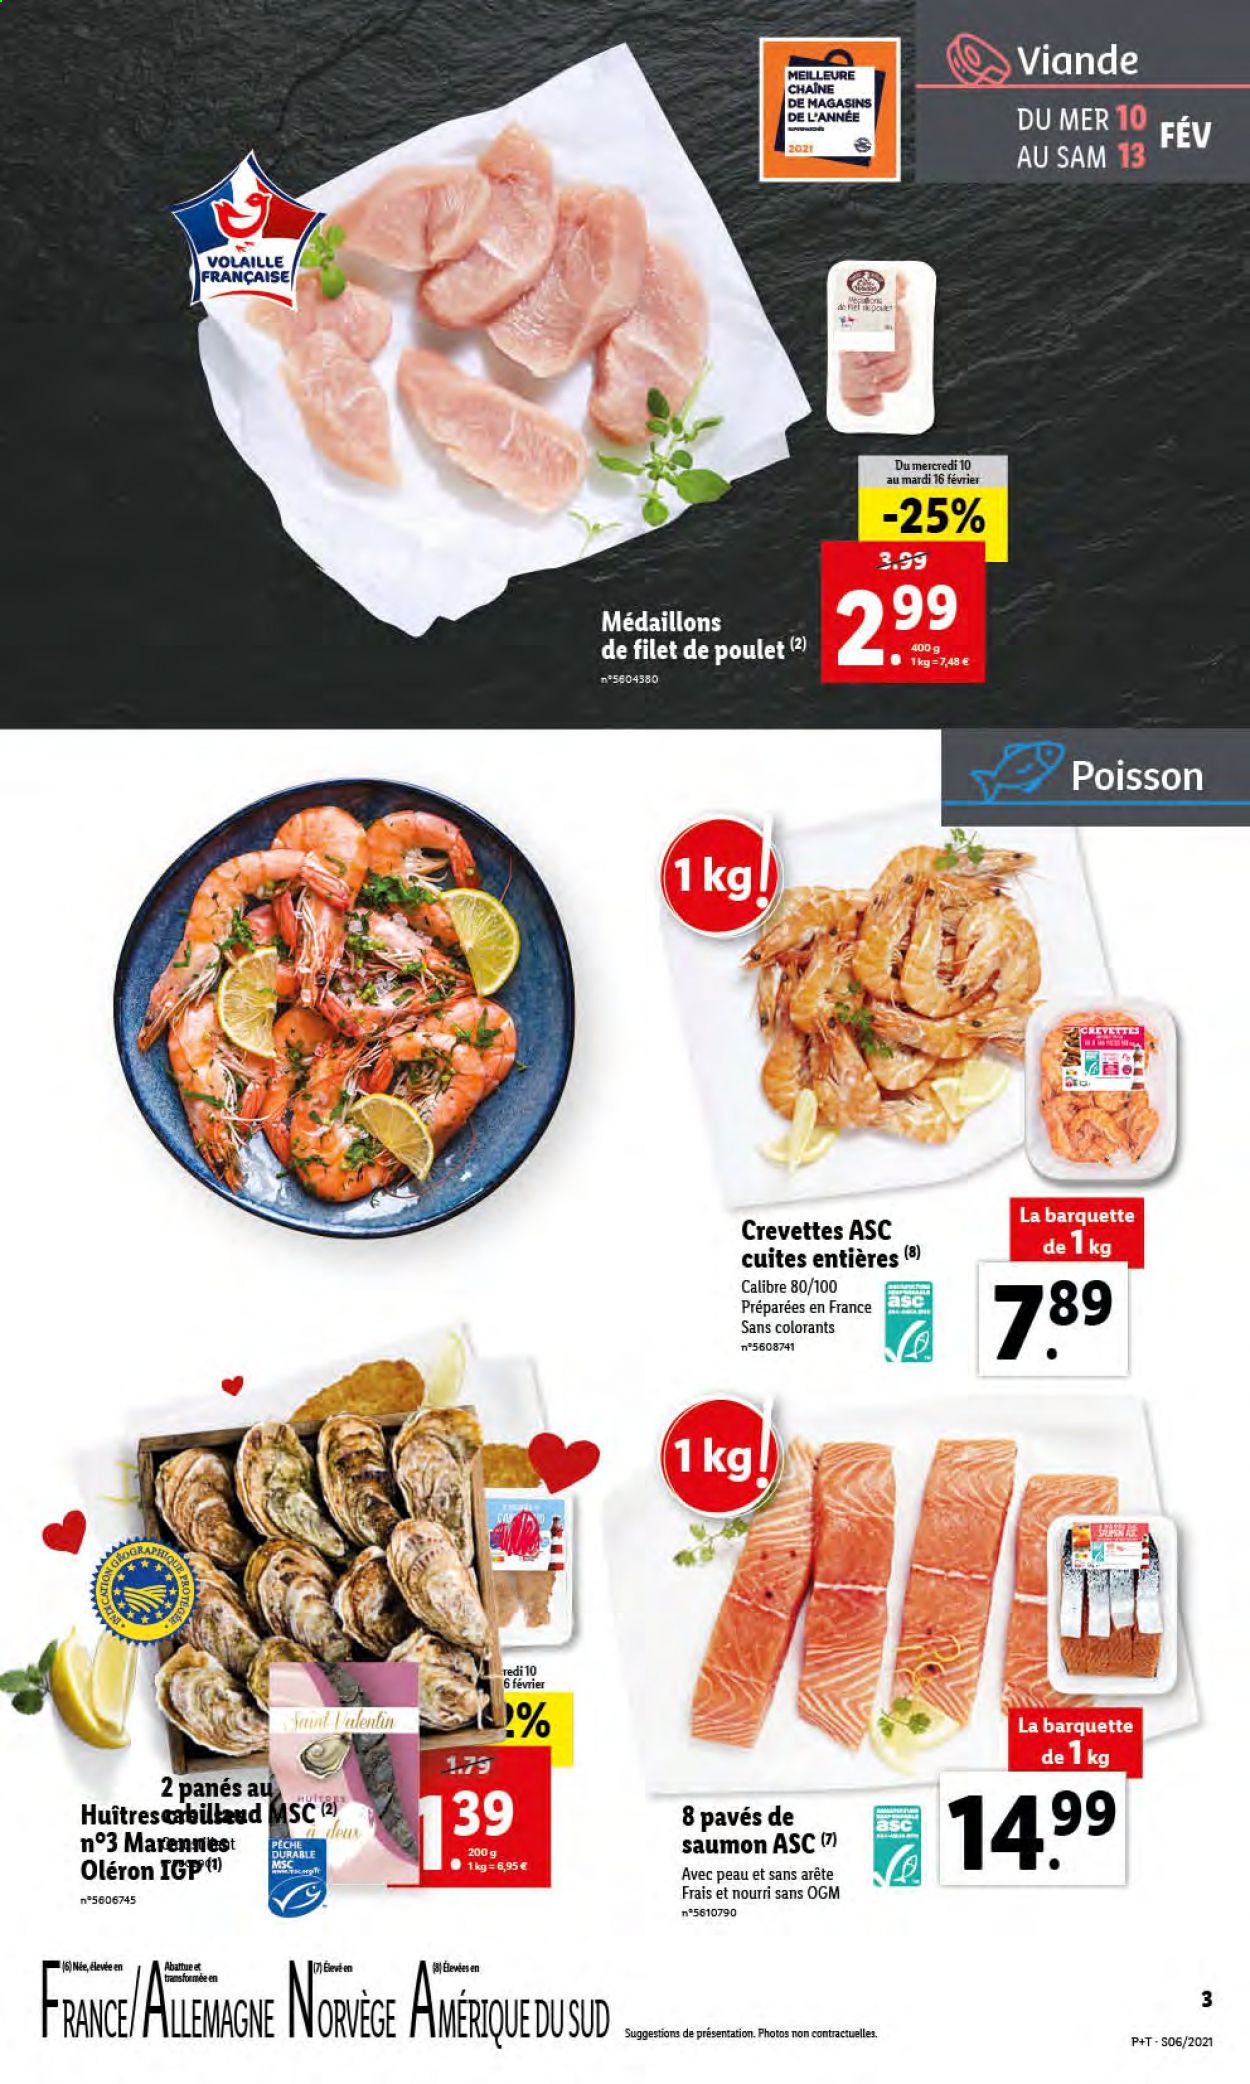 Catalogue Lidl - 10.02.2021 - 16.02.2021. Page 3.